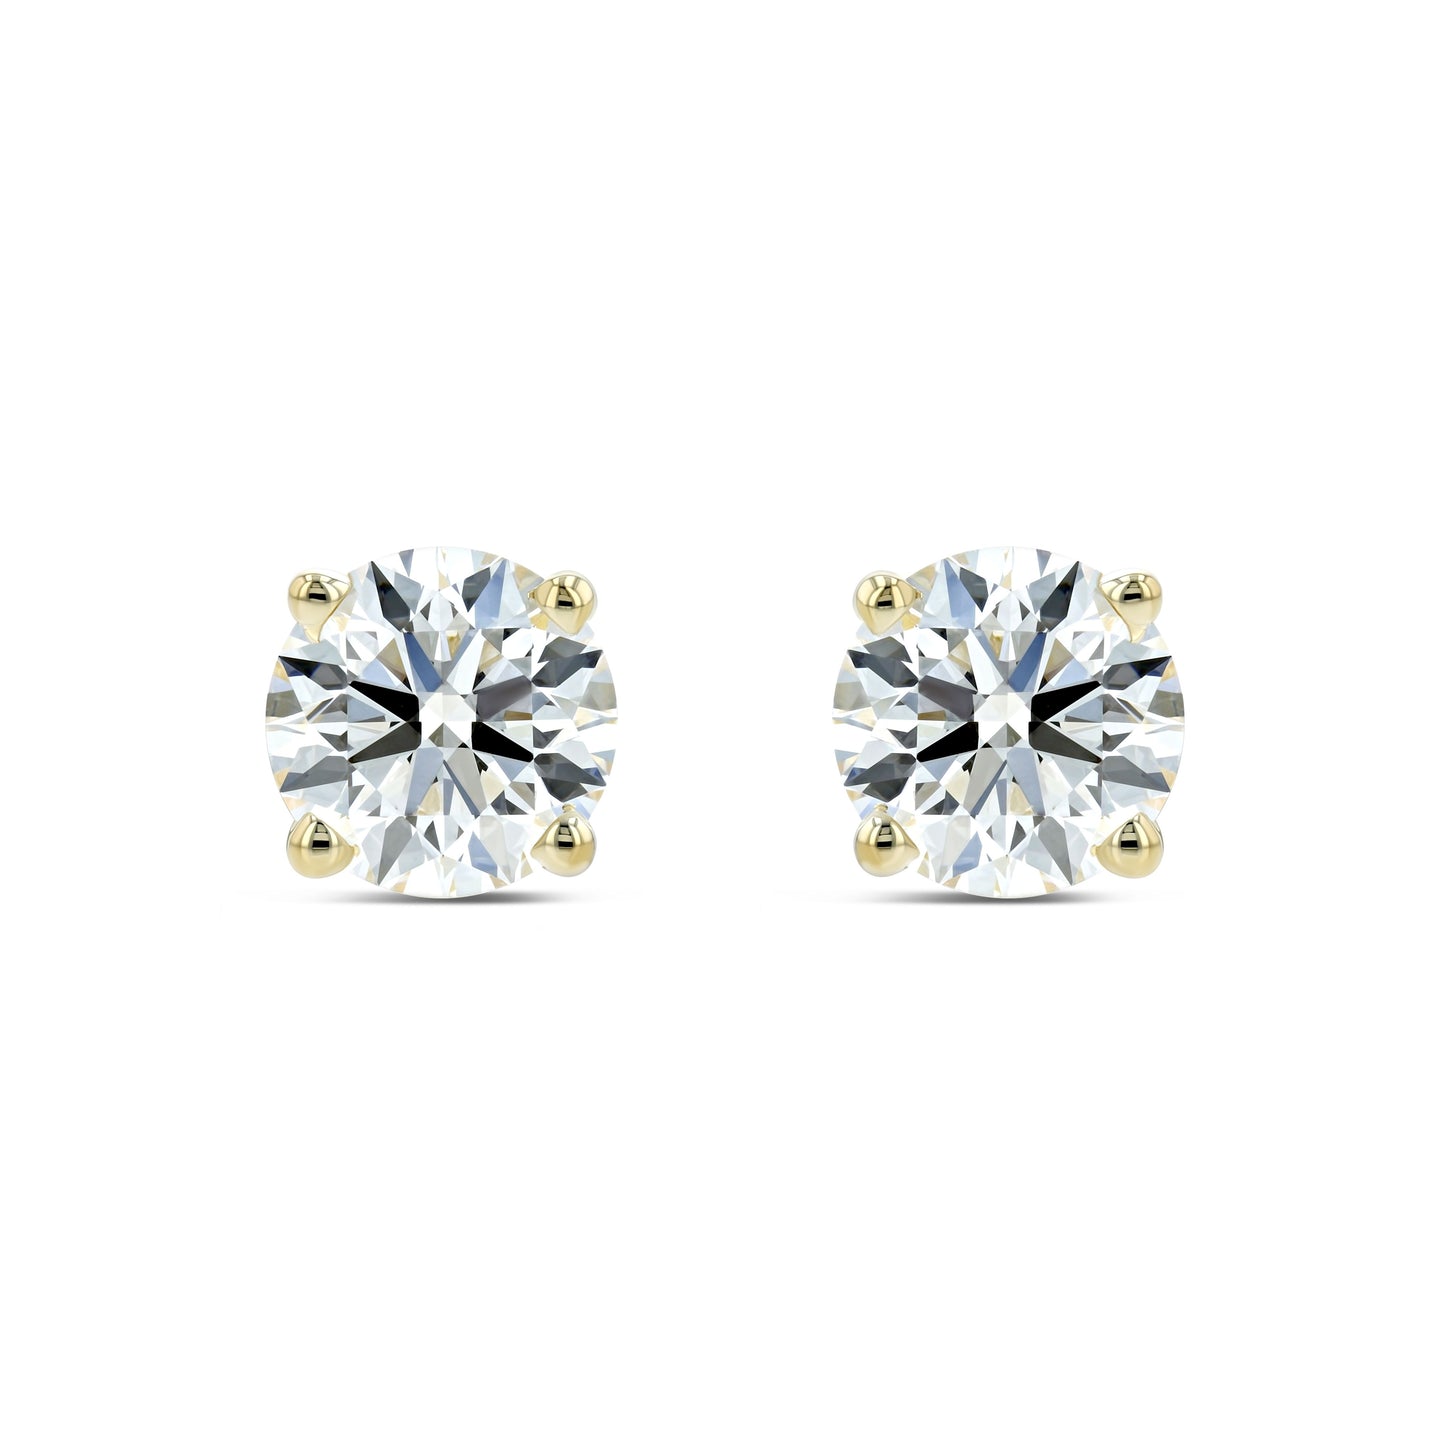 18k Yellow Gold 4-prong Round Diamond Stud Earrings 1ctw (5.00mm Ea), H Color, Si3-i1 Clarity